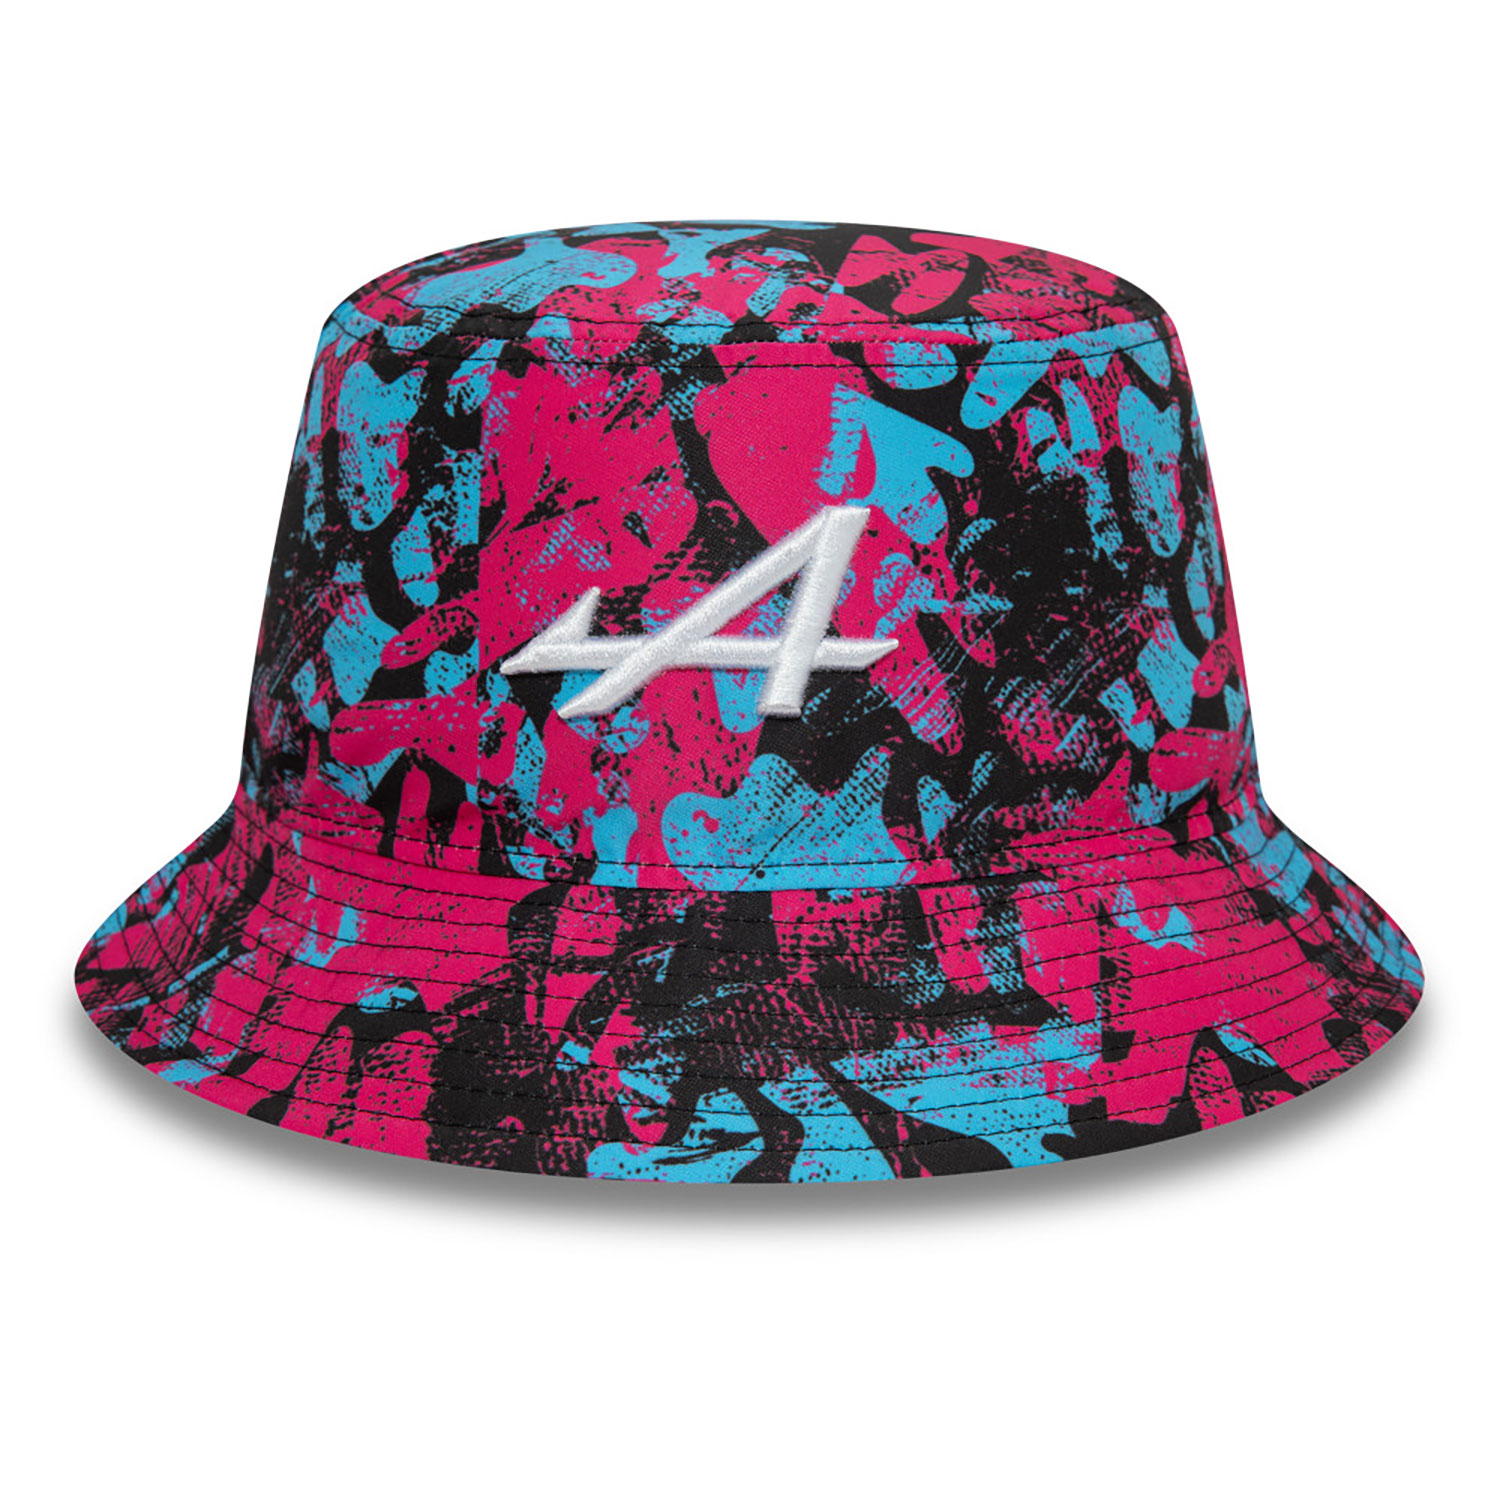 Alpine Racing Silverstone Race Special All Over Print Black Bucket Hat